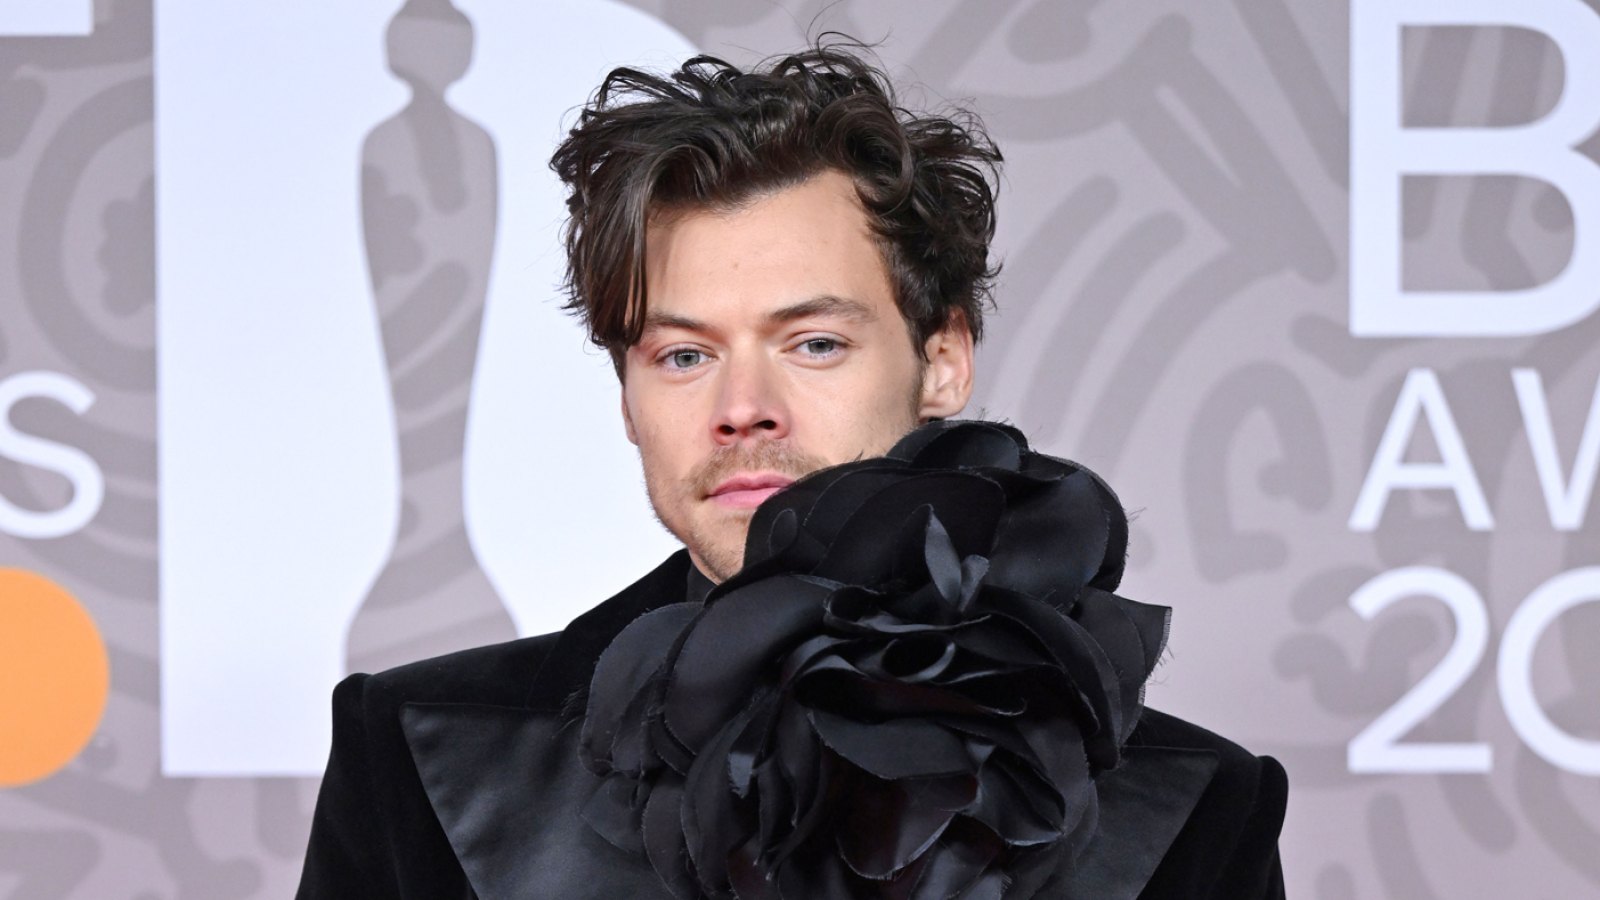 Harry Styles Spotted Growing Out His Hair After Shocking Fans With a Buzz Cut